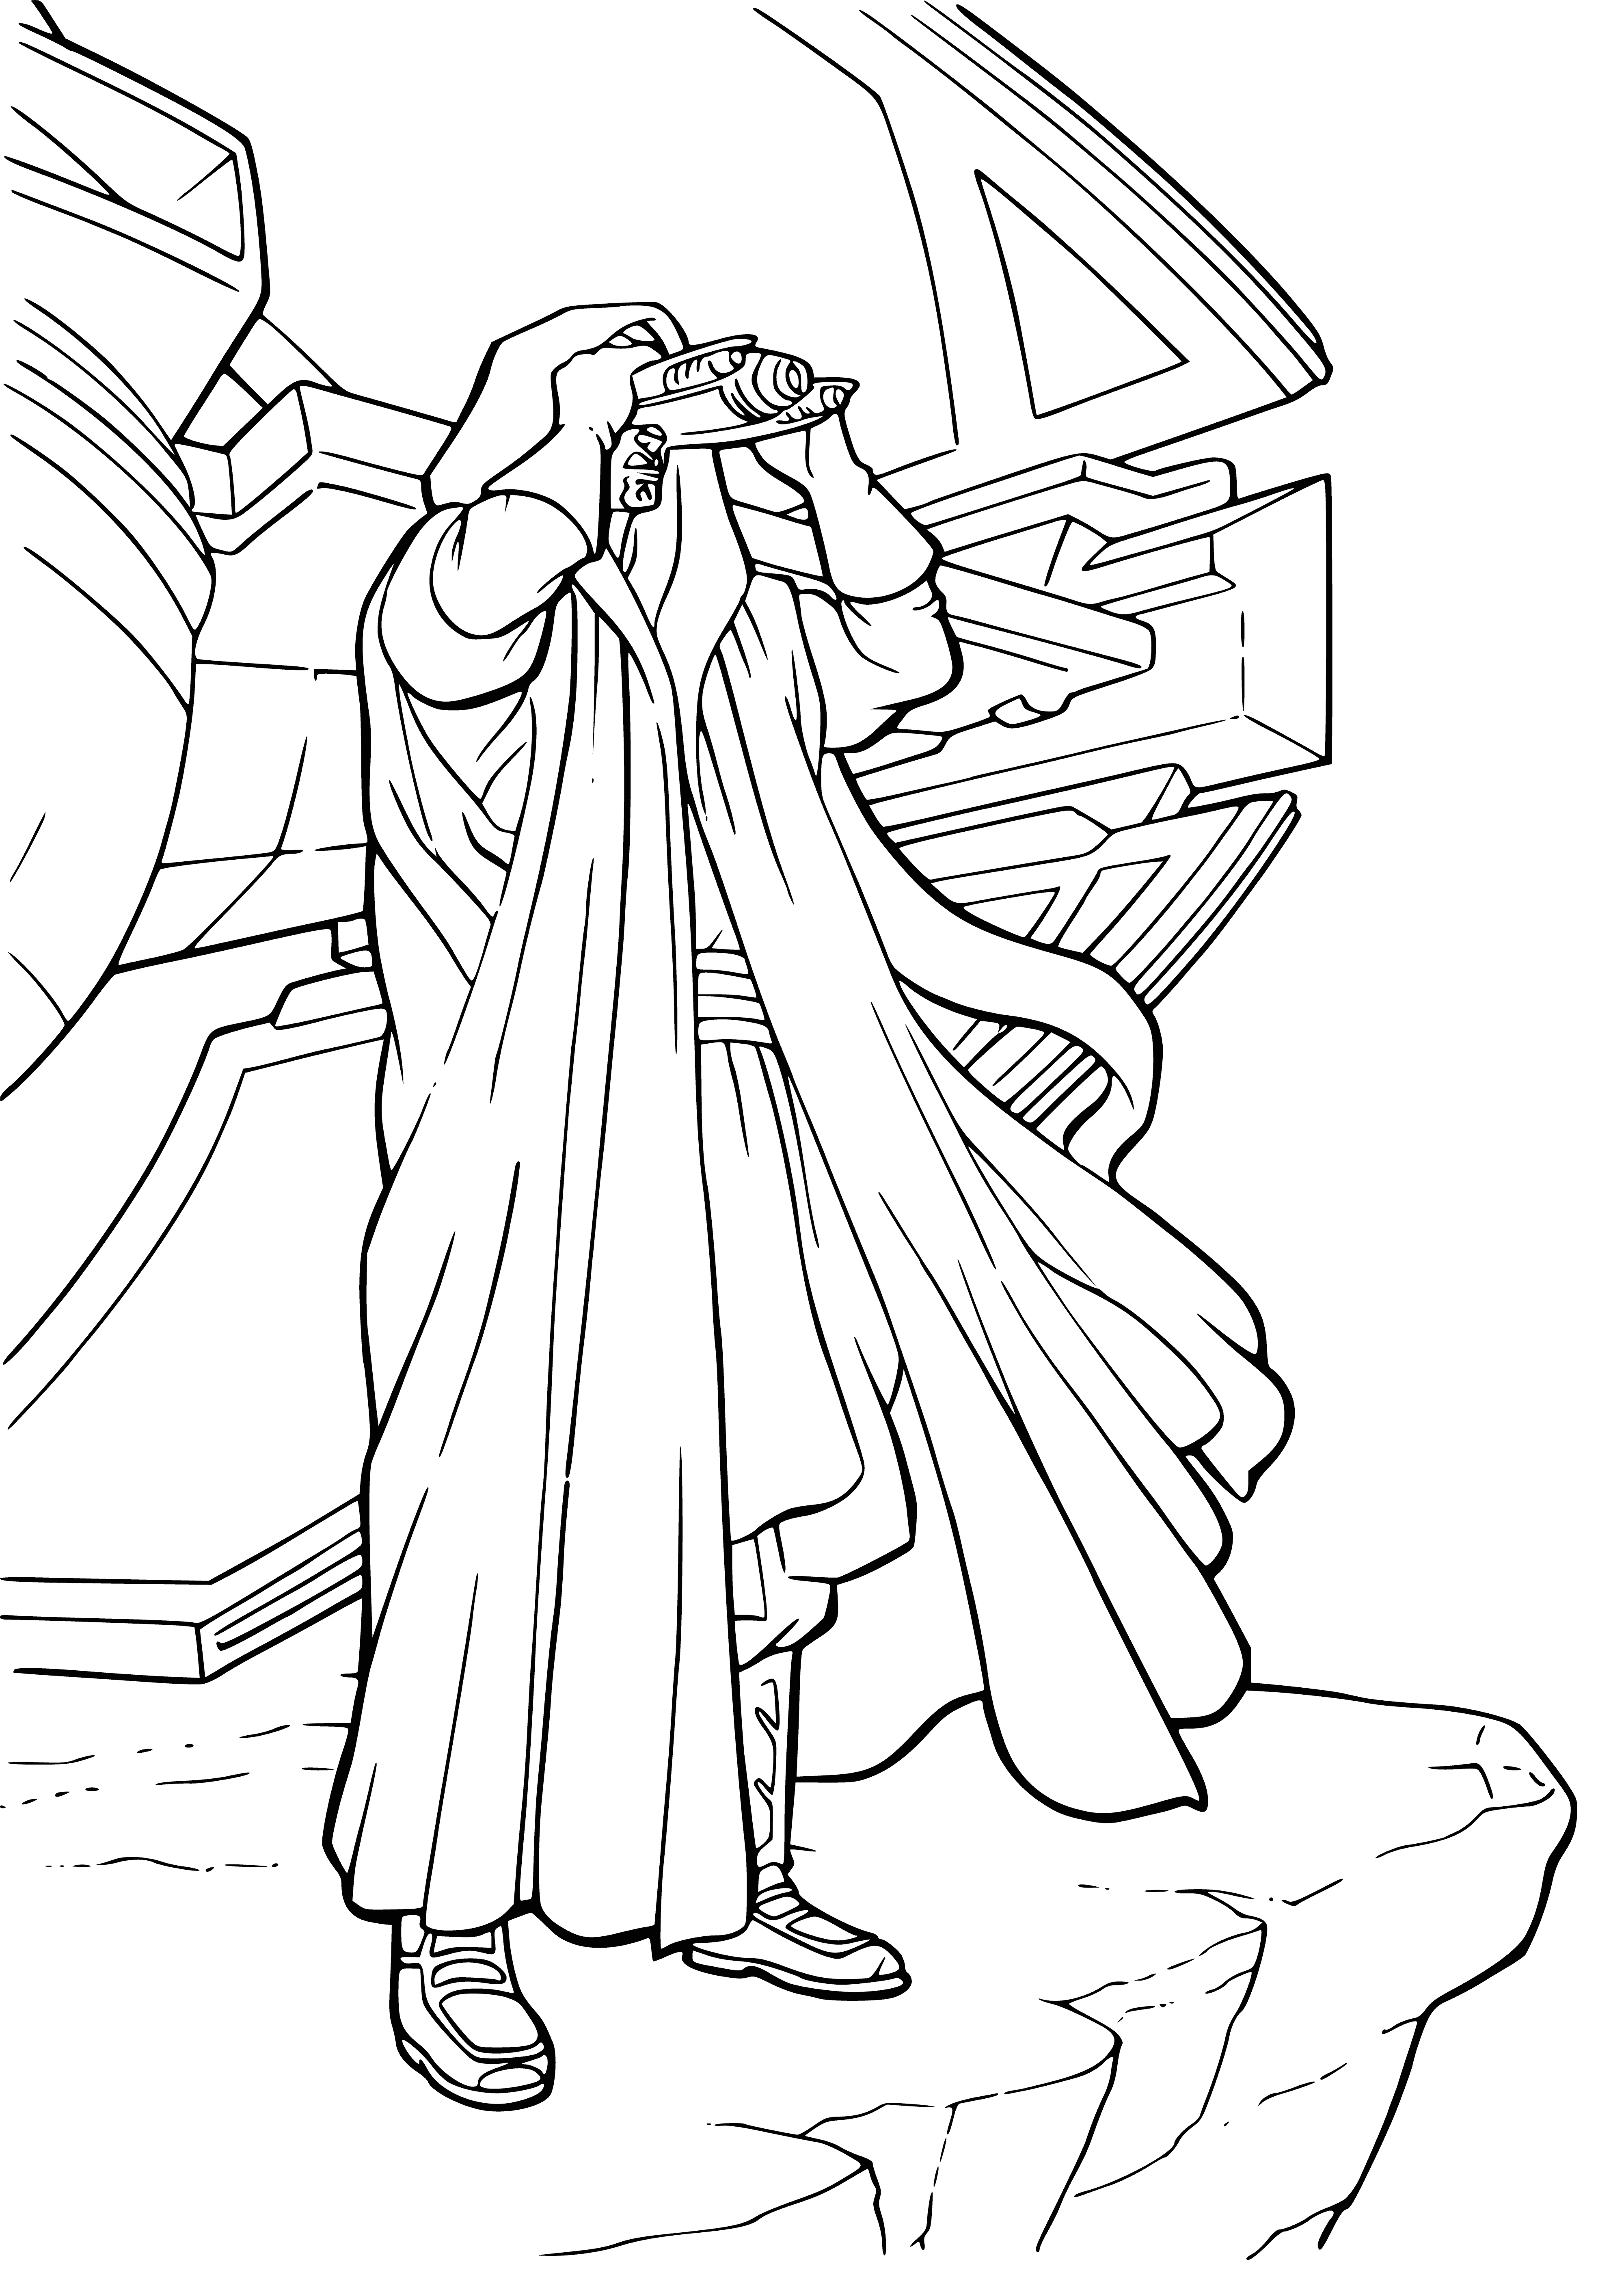 coloring page: Enakin Skywalker stands with a lightsaber in hand & a determined look. Fighting for the fate of the galaxy against a white background. #StarWars #RevengeOfTheSith